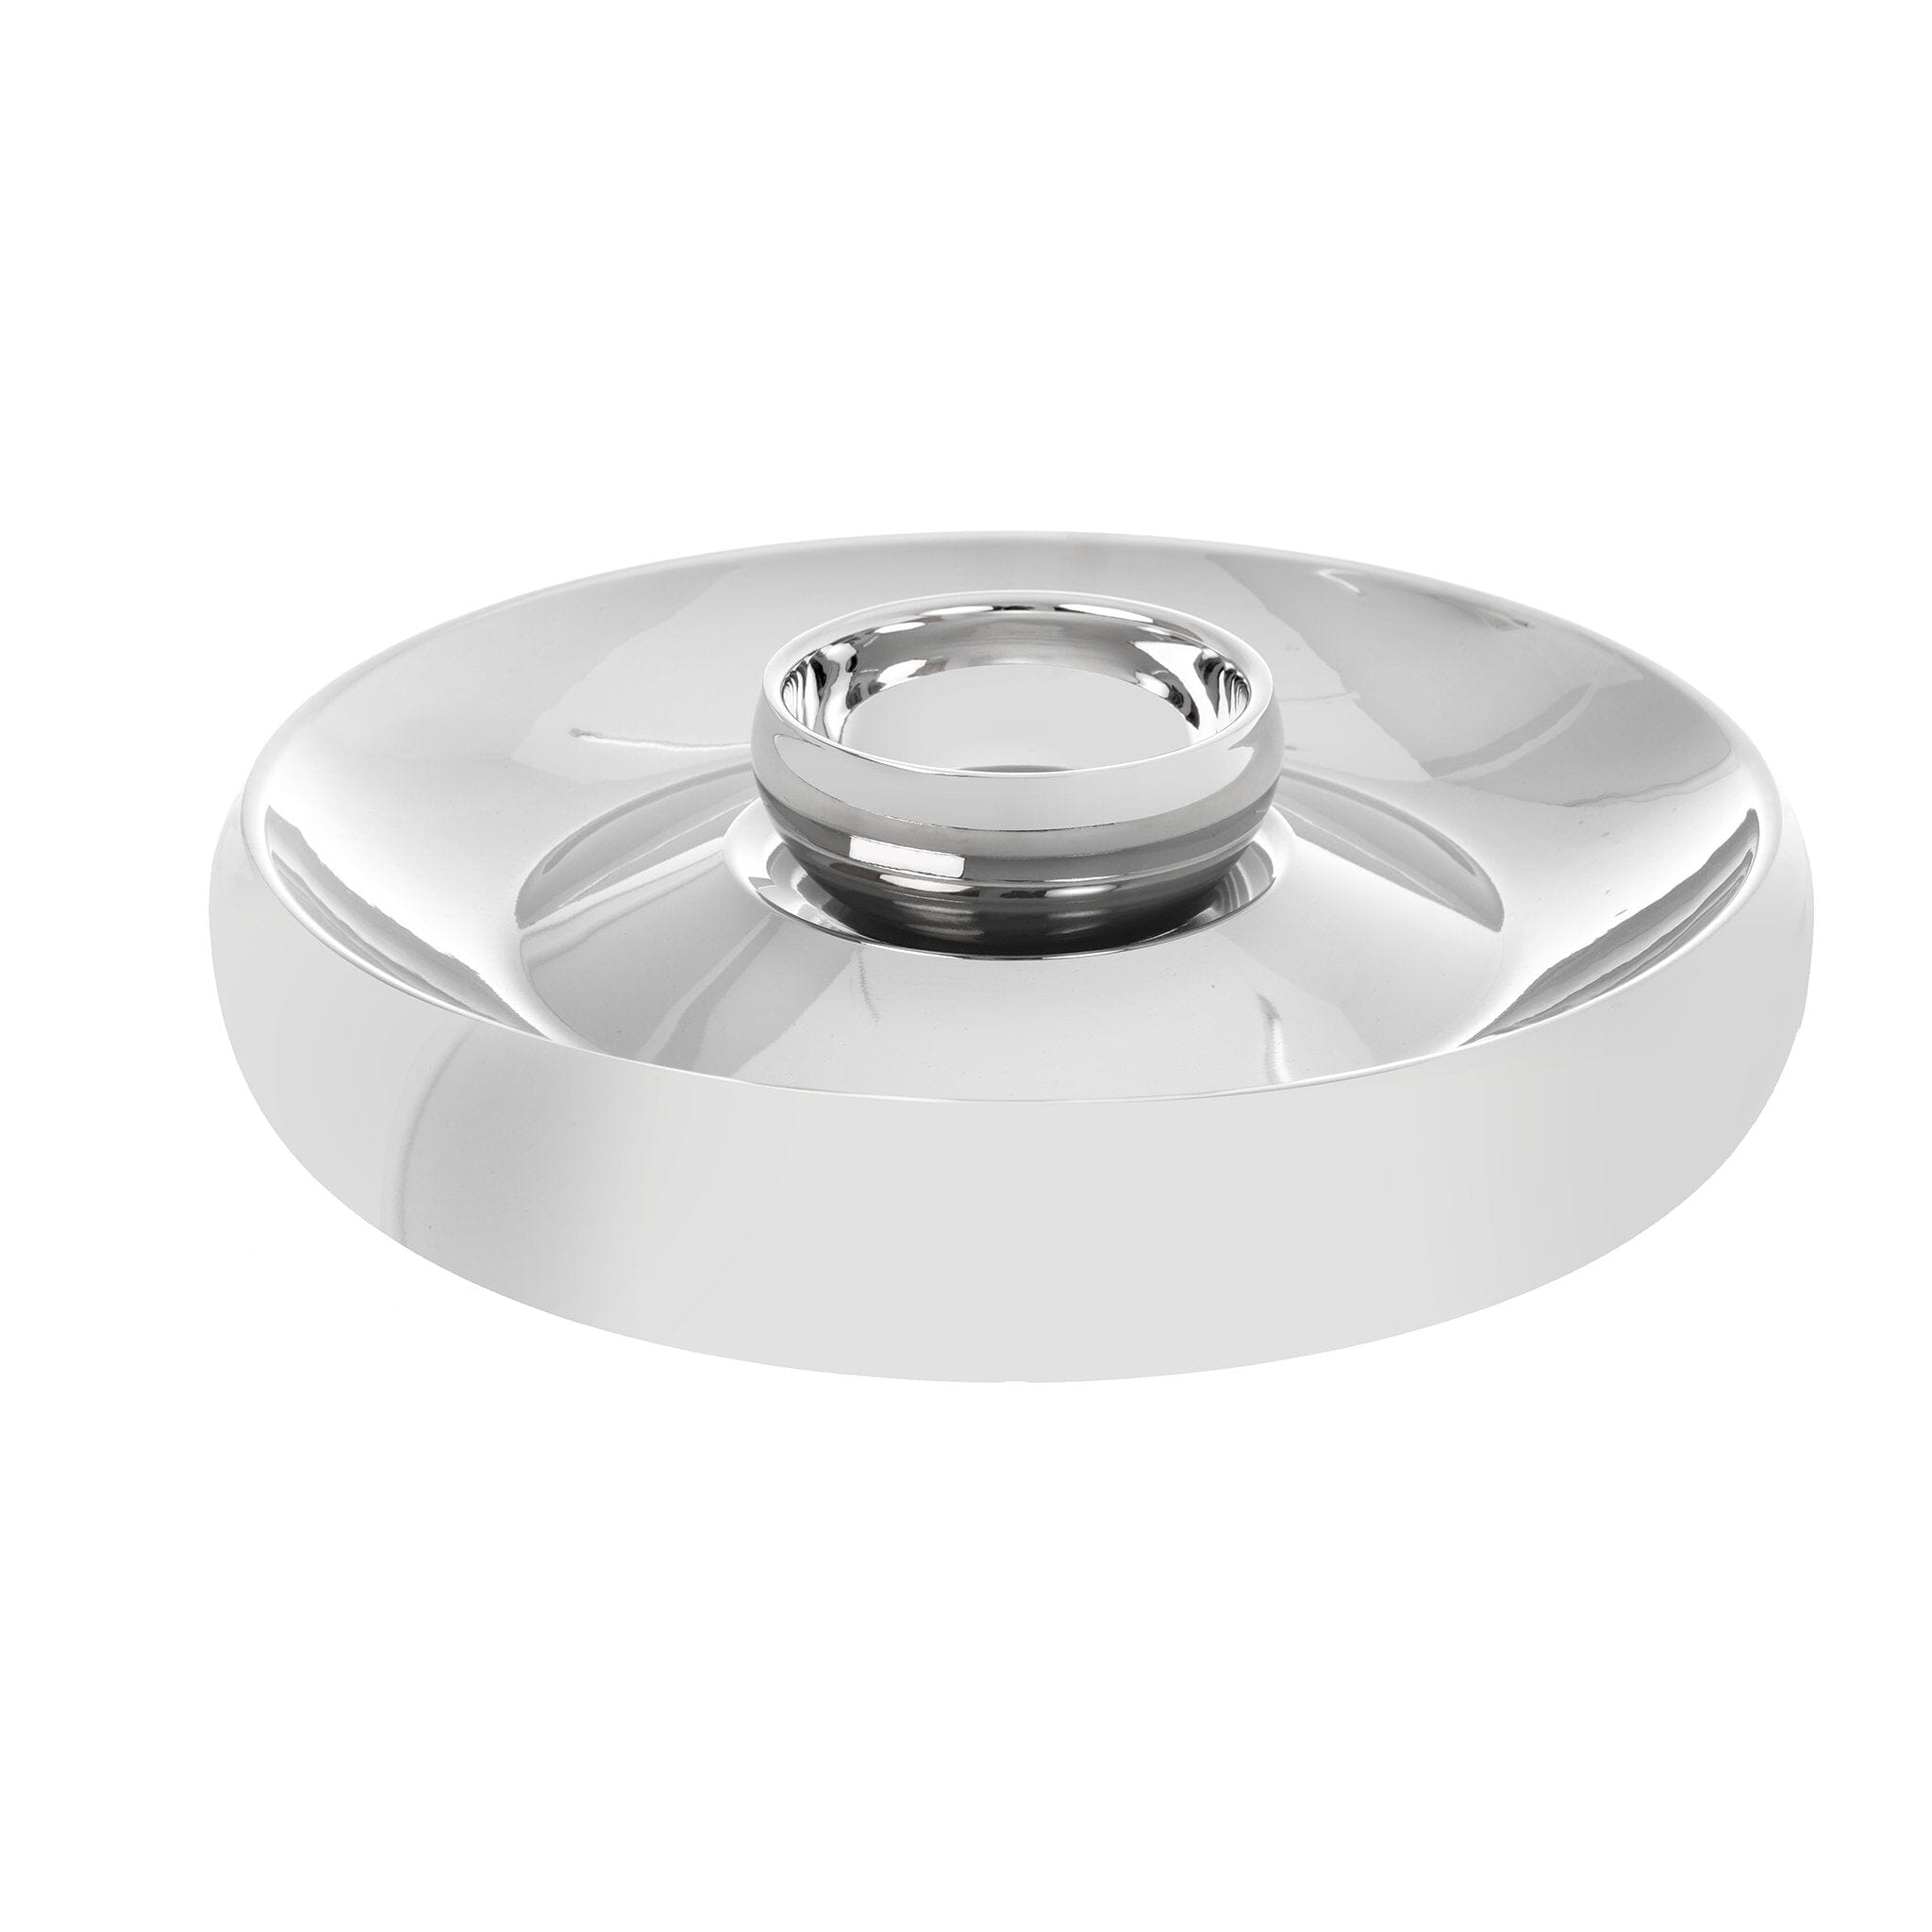 Chip & Dip Round Plate with Bowl - Stainless Steel - 37cm - 80003973